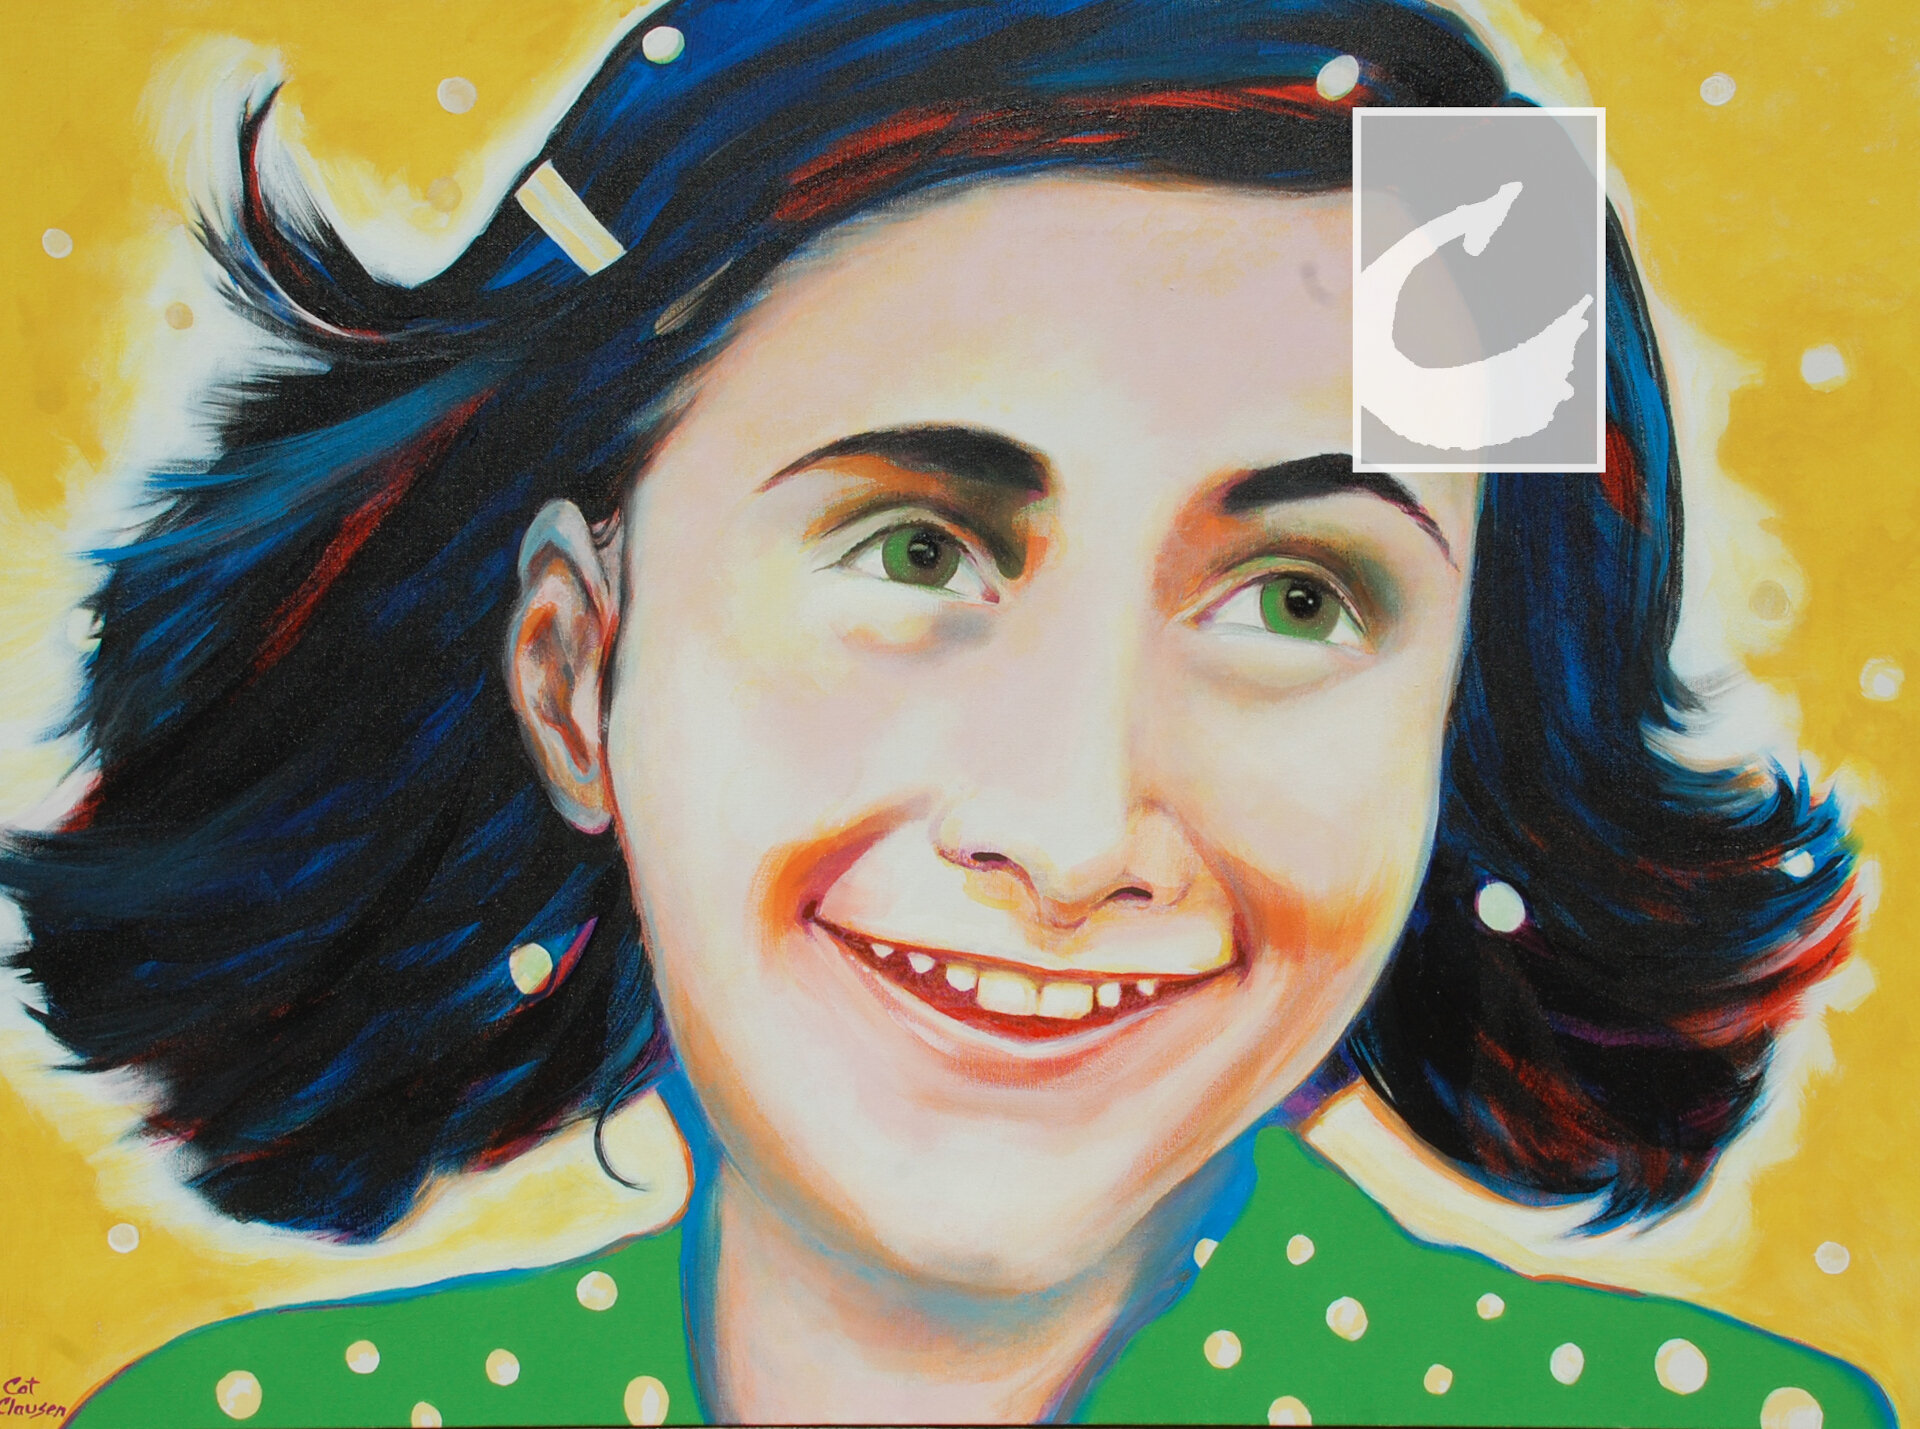 ANNE FRANK (This one-of-a-kind original painting stands alone in 